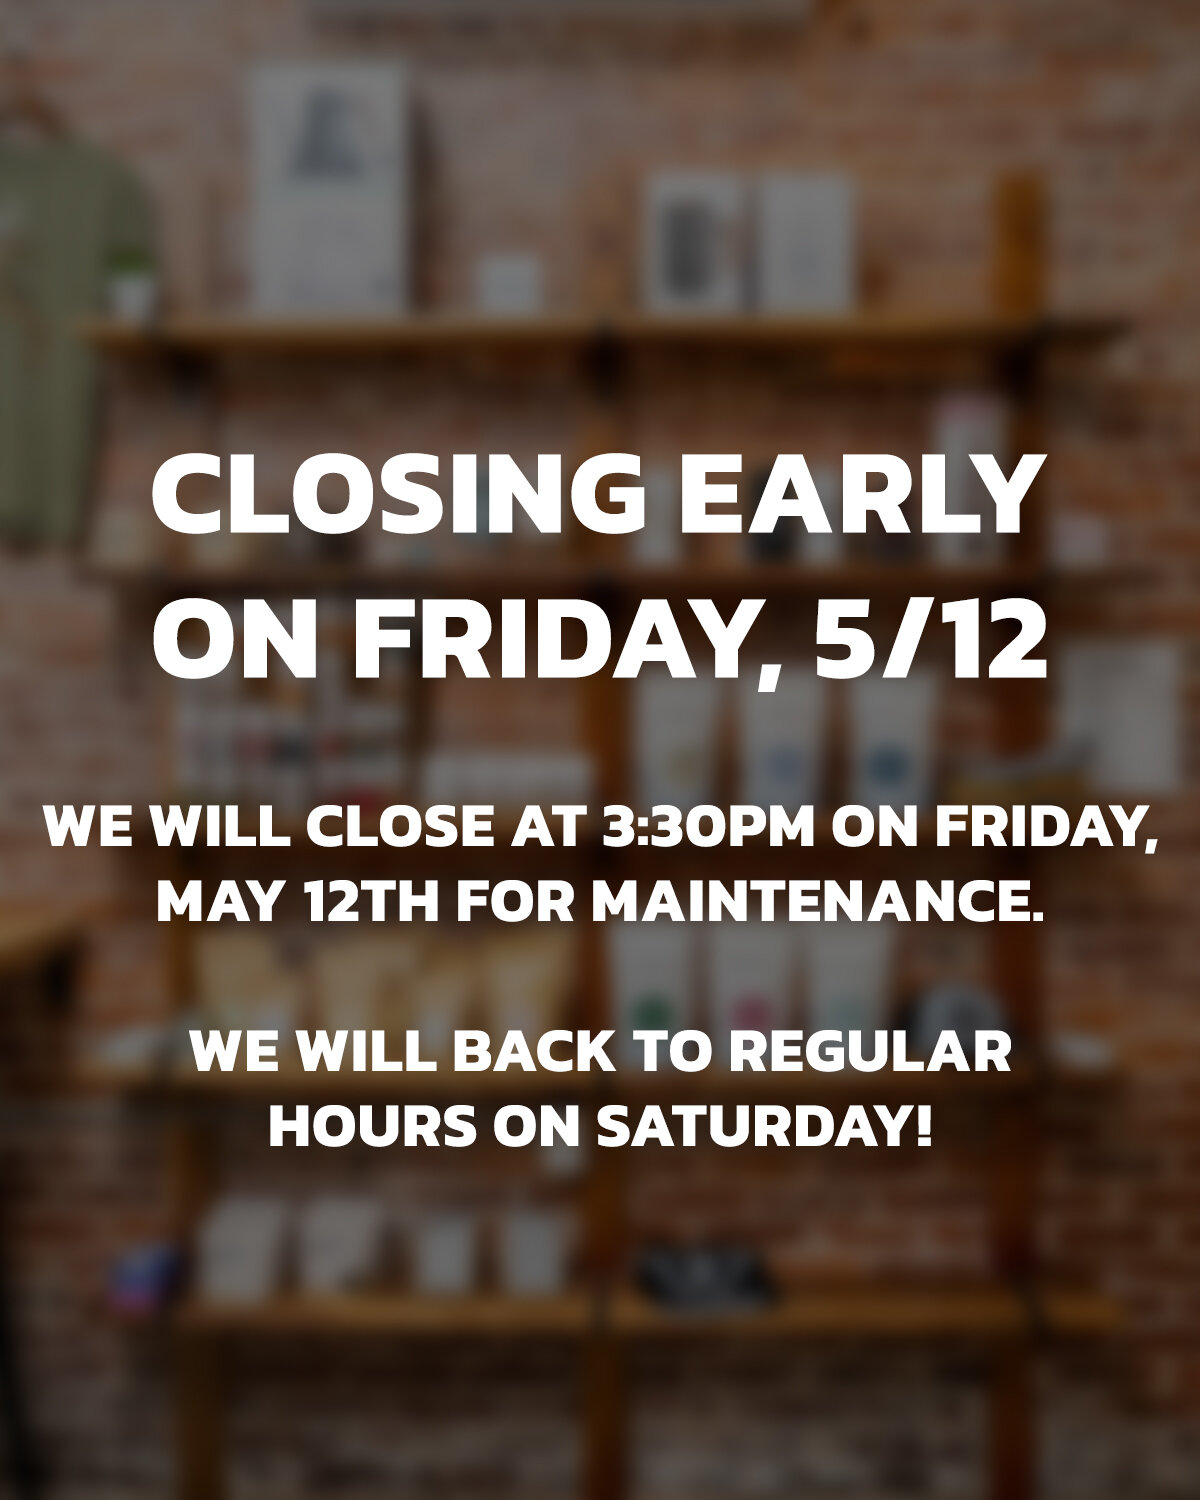 We will be closing early on Friday, May 12th at 3:30PM. Thank you!
#waypointcoffeeco